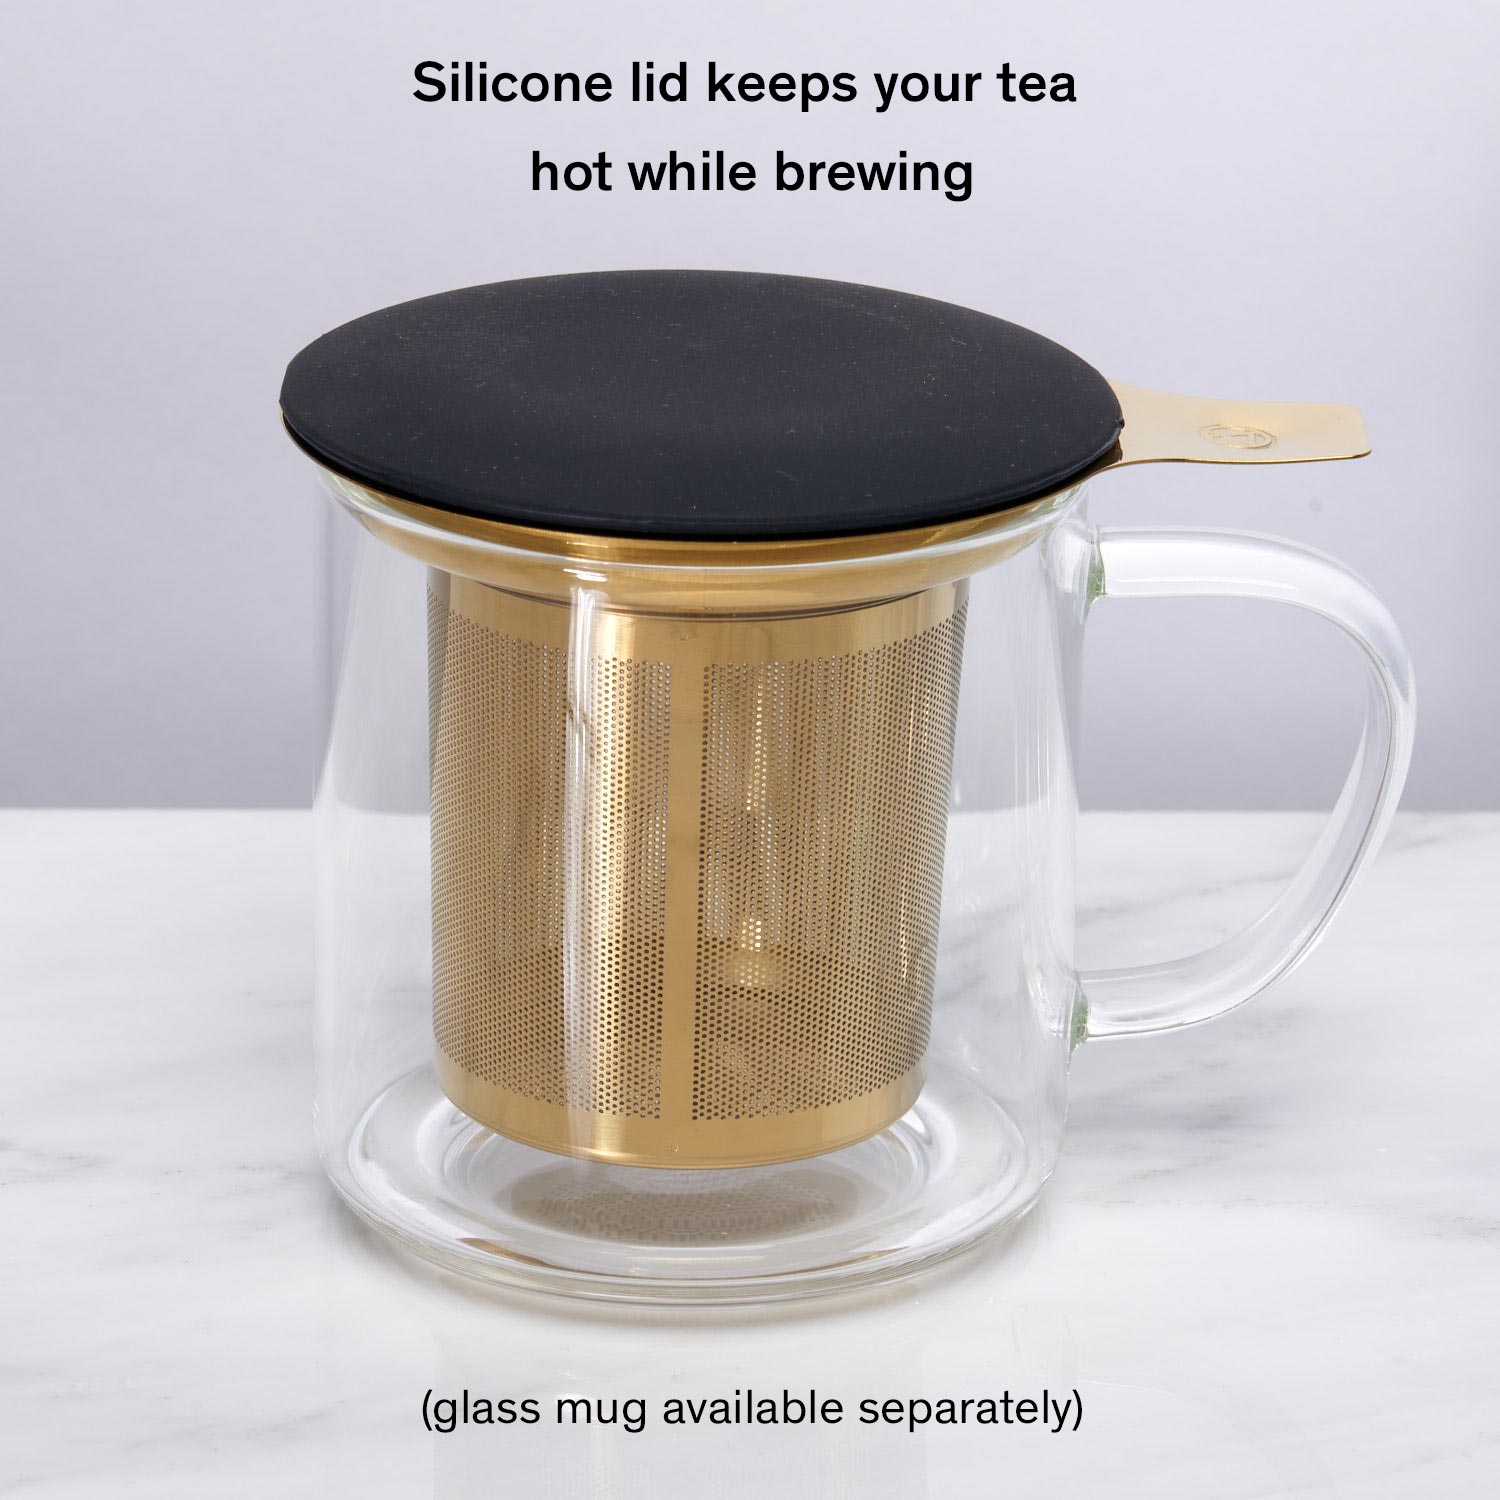 Mr. Coffee Stainless Steel Tea Kettle, ceramic cups tea set & sweet treats  Gift Box - Gifts all Mexico